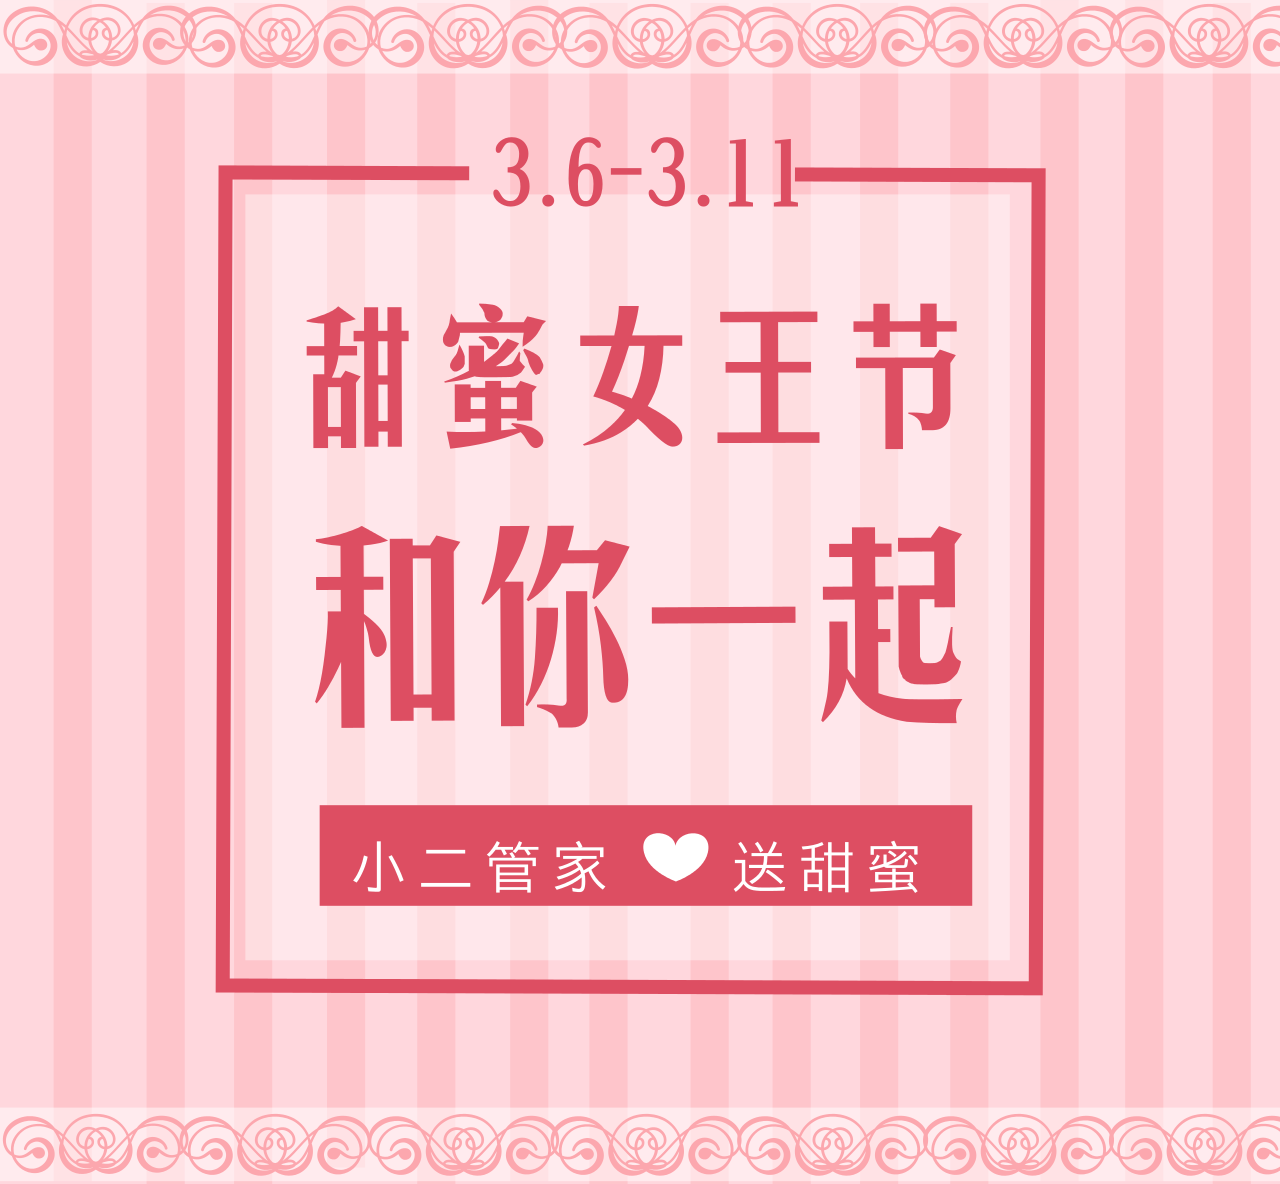 ???_???????_2018.03.06 (1).png